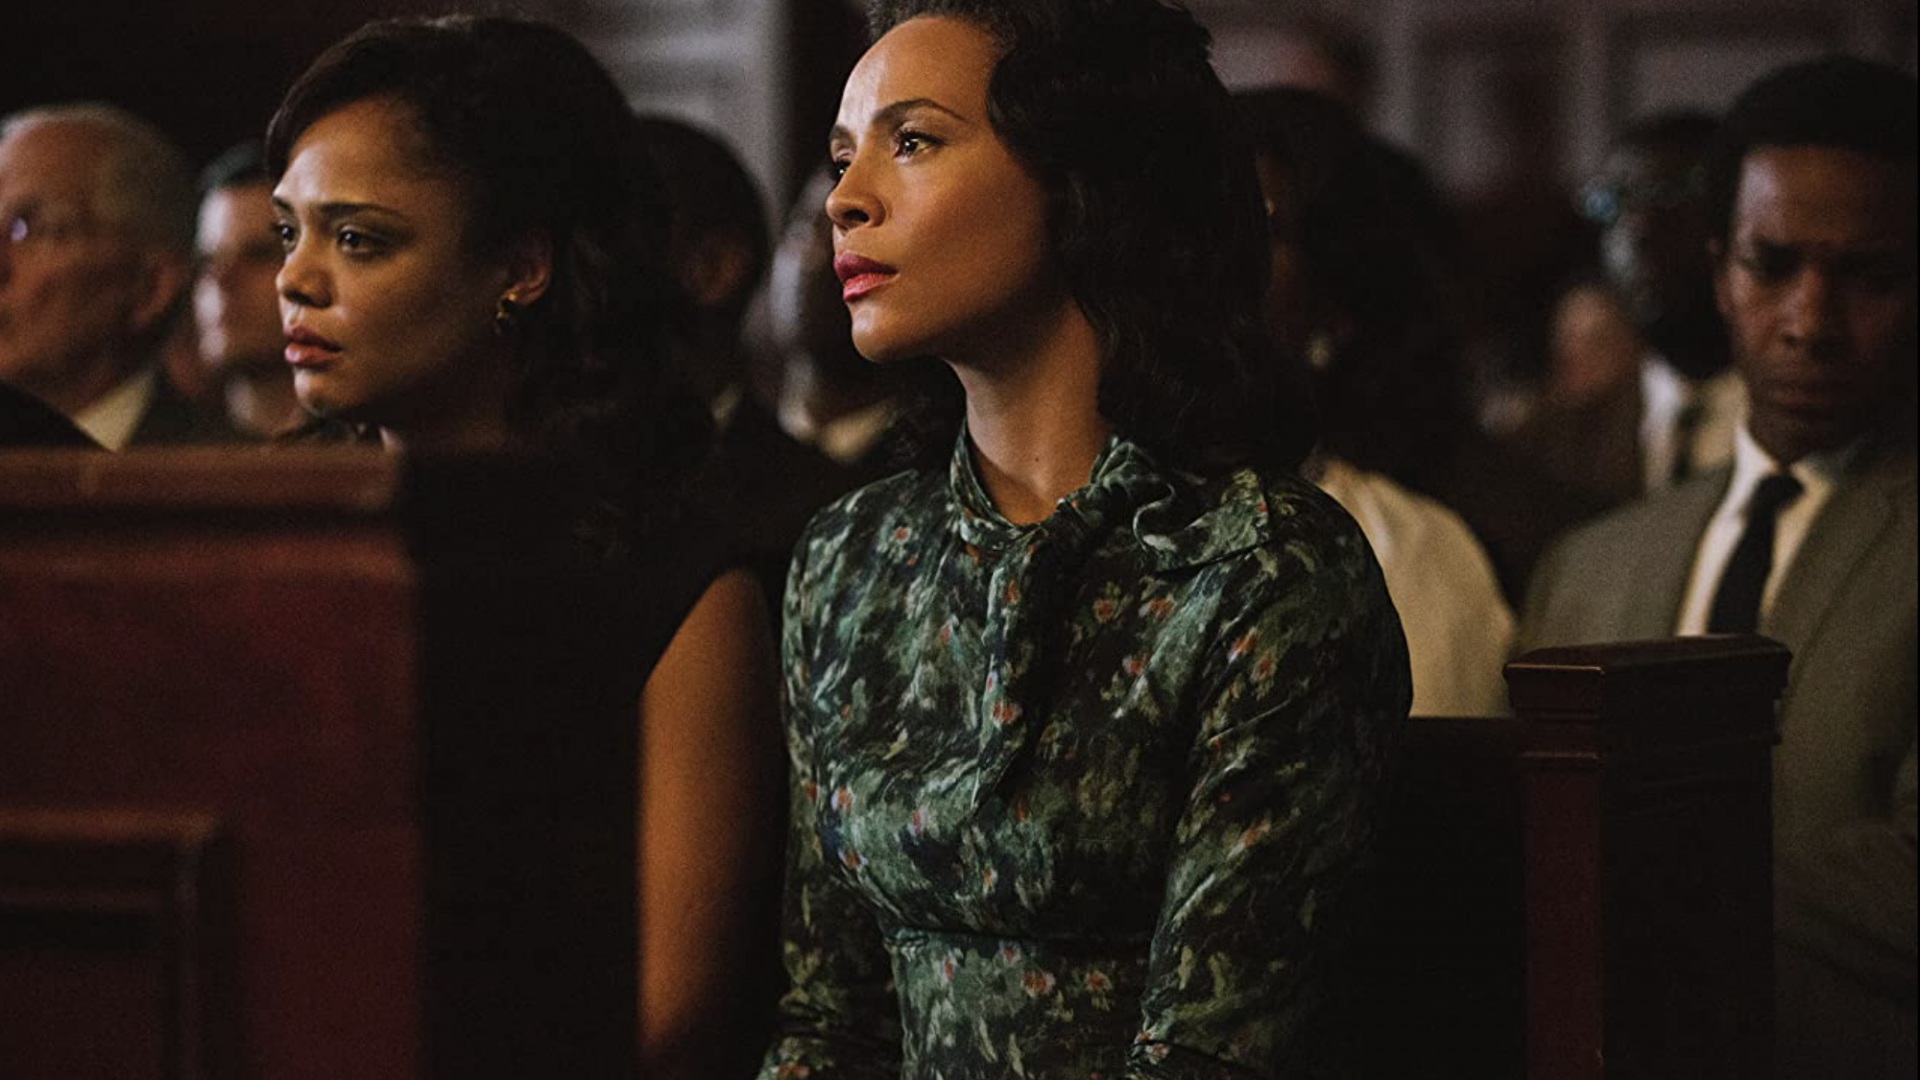 15 Actors Who Have Played Martin Luther King Jr. And Coretta Scott King